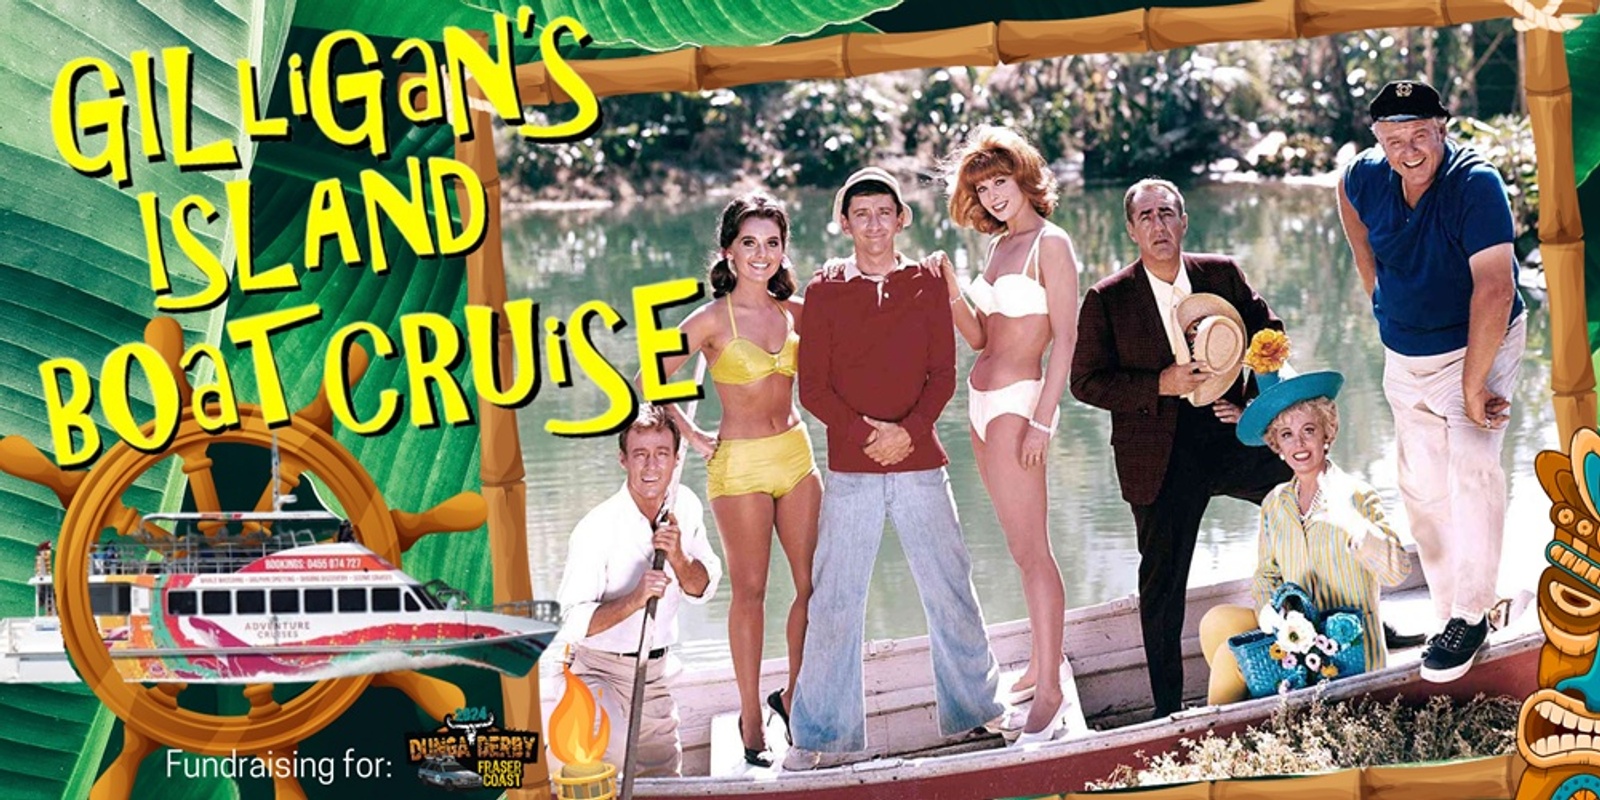 Banner image for Gilligan's Island Boat Cruise